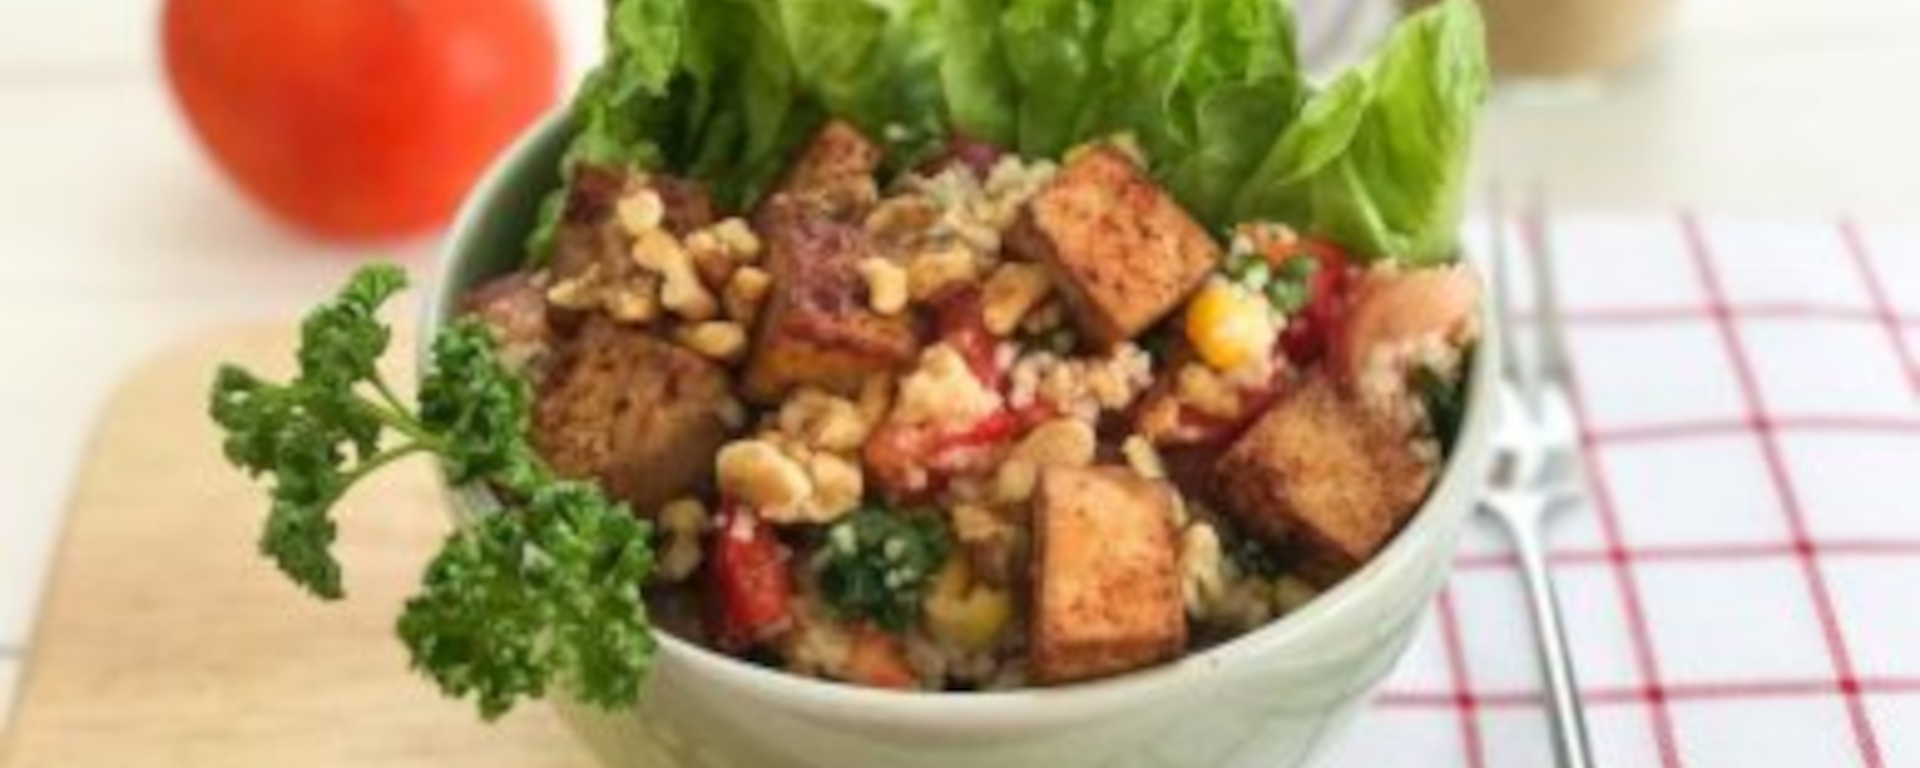 Couscous Salad with Bell Pepper, Tofu and Sweet Corn